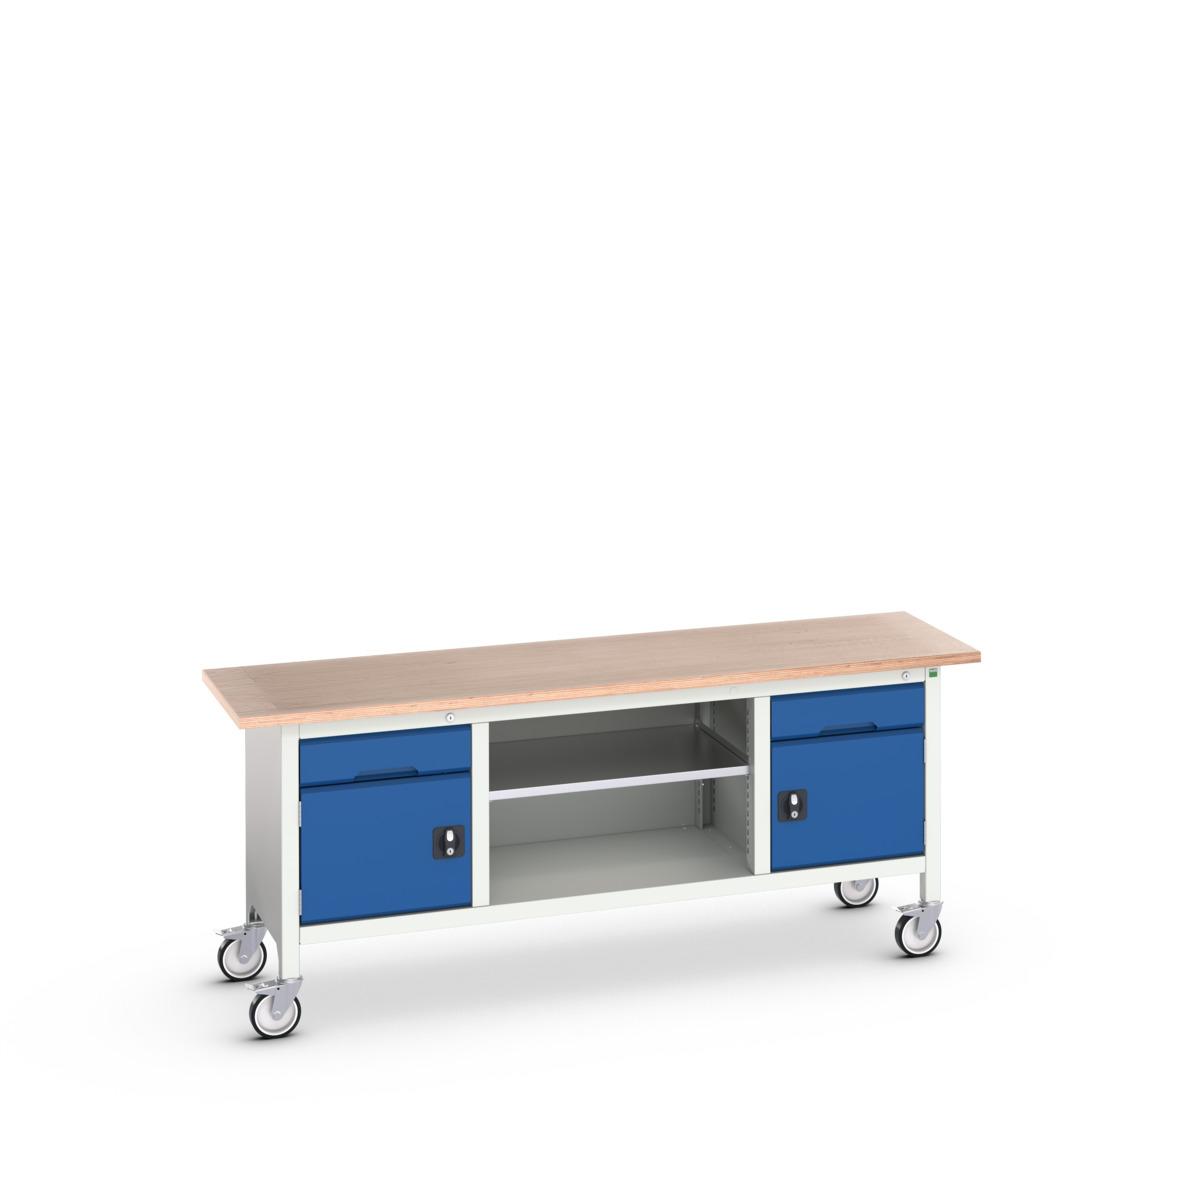 16923231.11 - verso mobile storage bench (mpx)